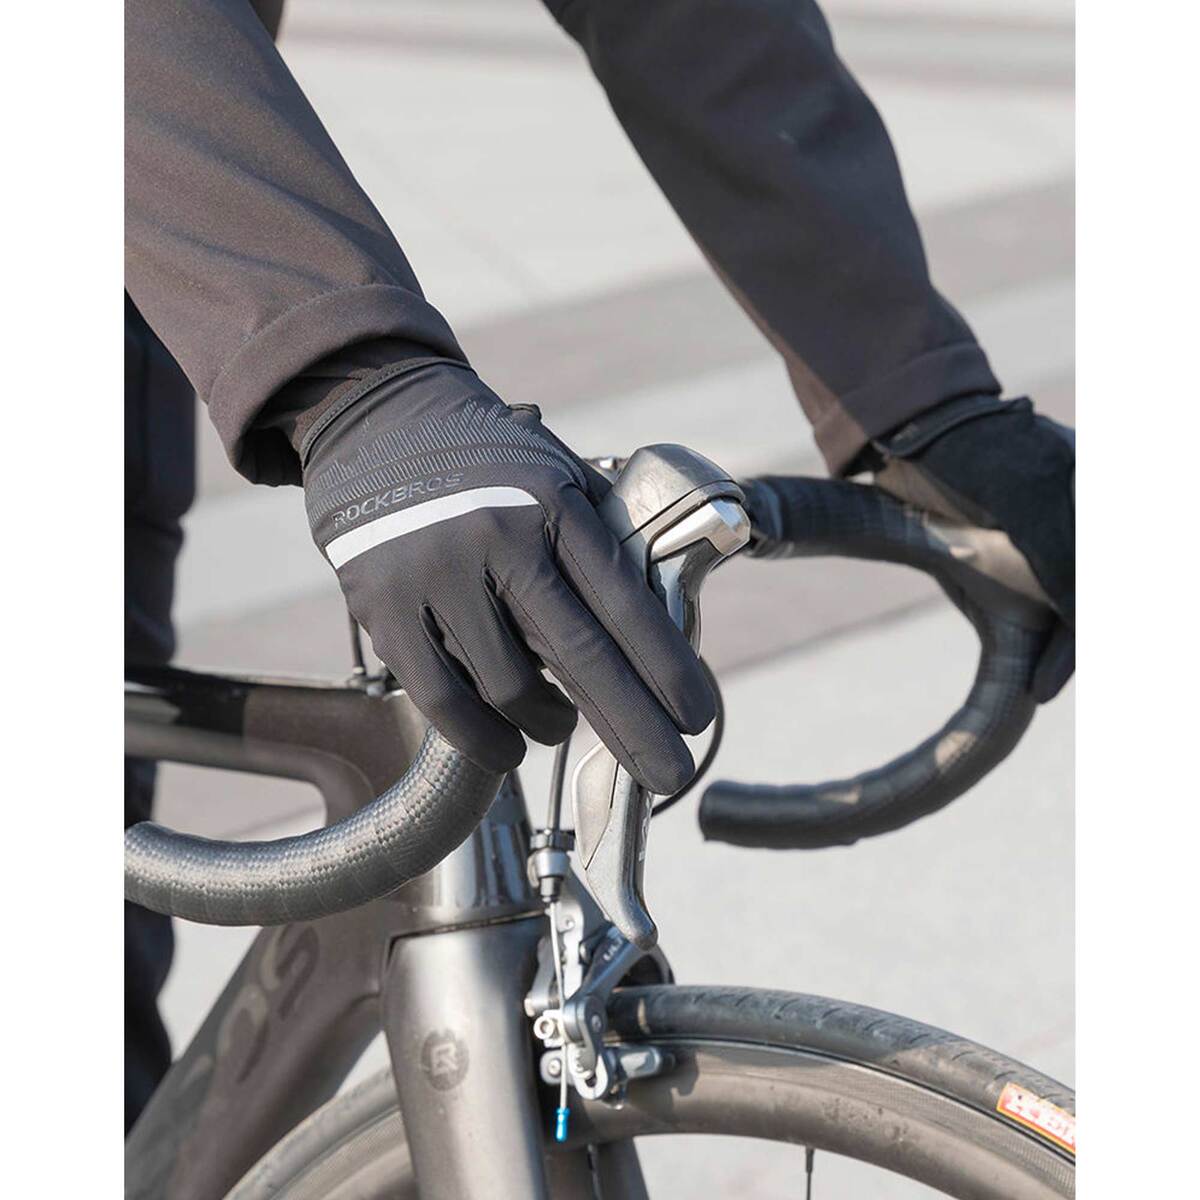 ROCKBROS Touch Screen Cycling Gloves S247-1 Medium